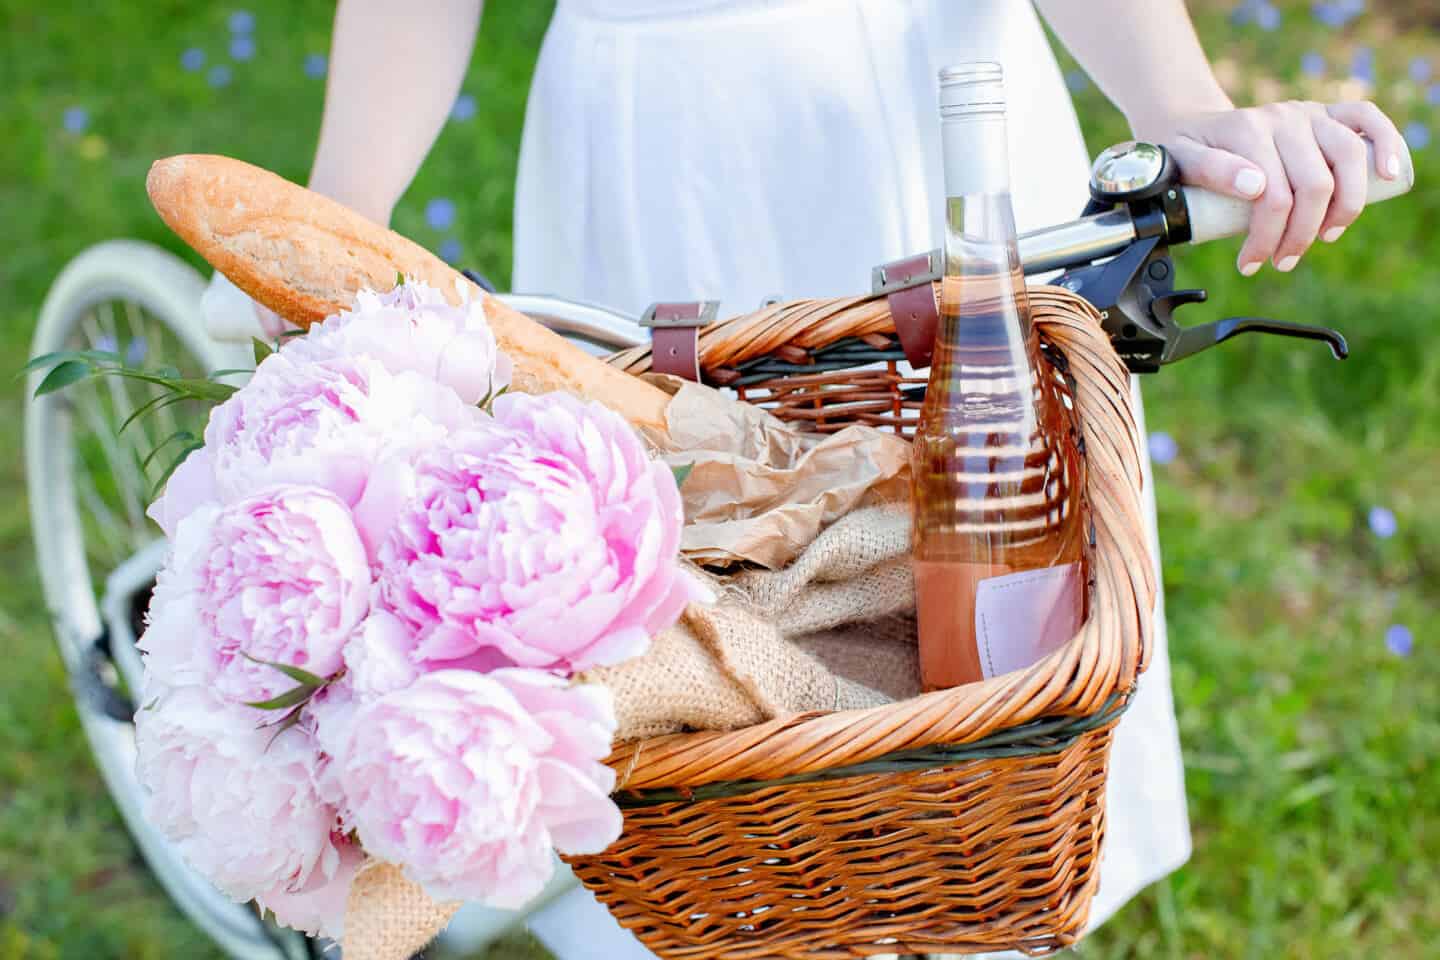 A bunch of pale pink peony flowers lies beside a baguette and a bottle of wine in the basket of a bicycle being ridden by a young white woman.